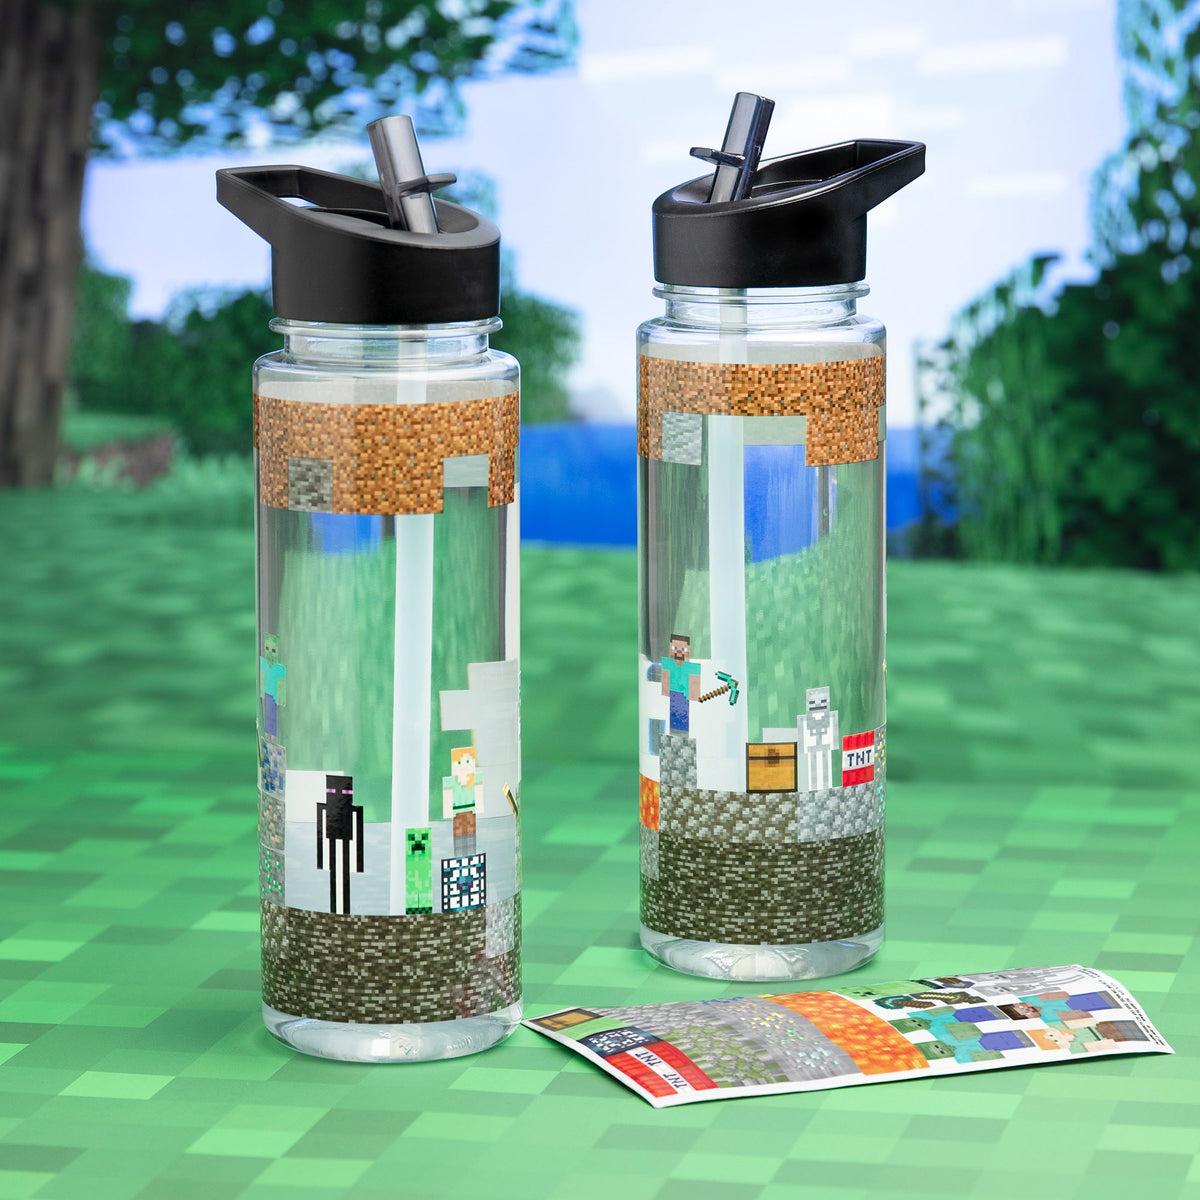 PALADONE PRODUCTS INC. Novelties Minecraft Water Bottle With Stickers 5055964788483